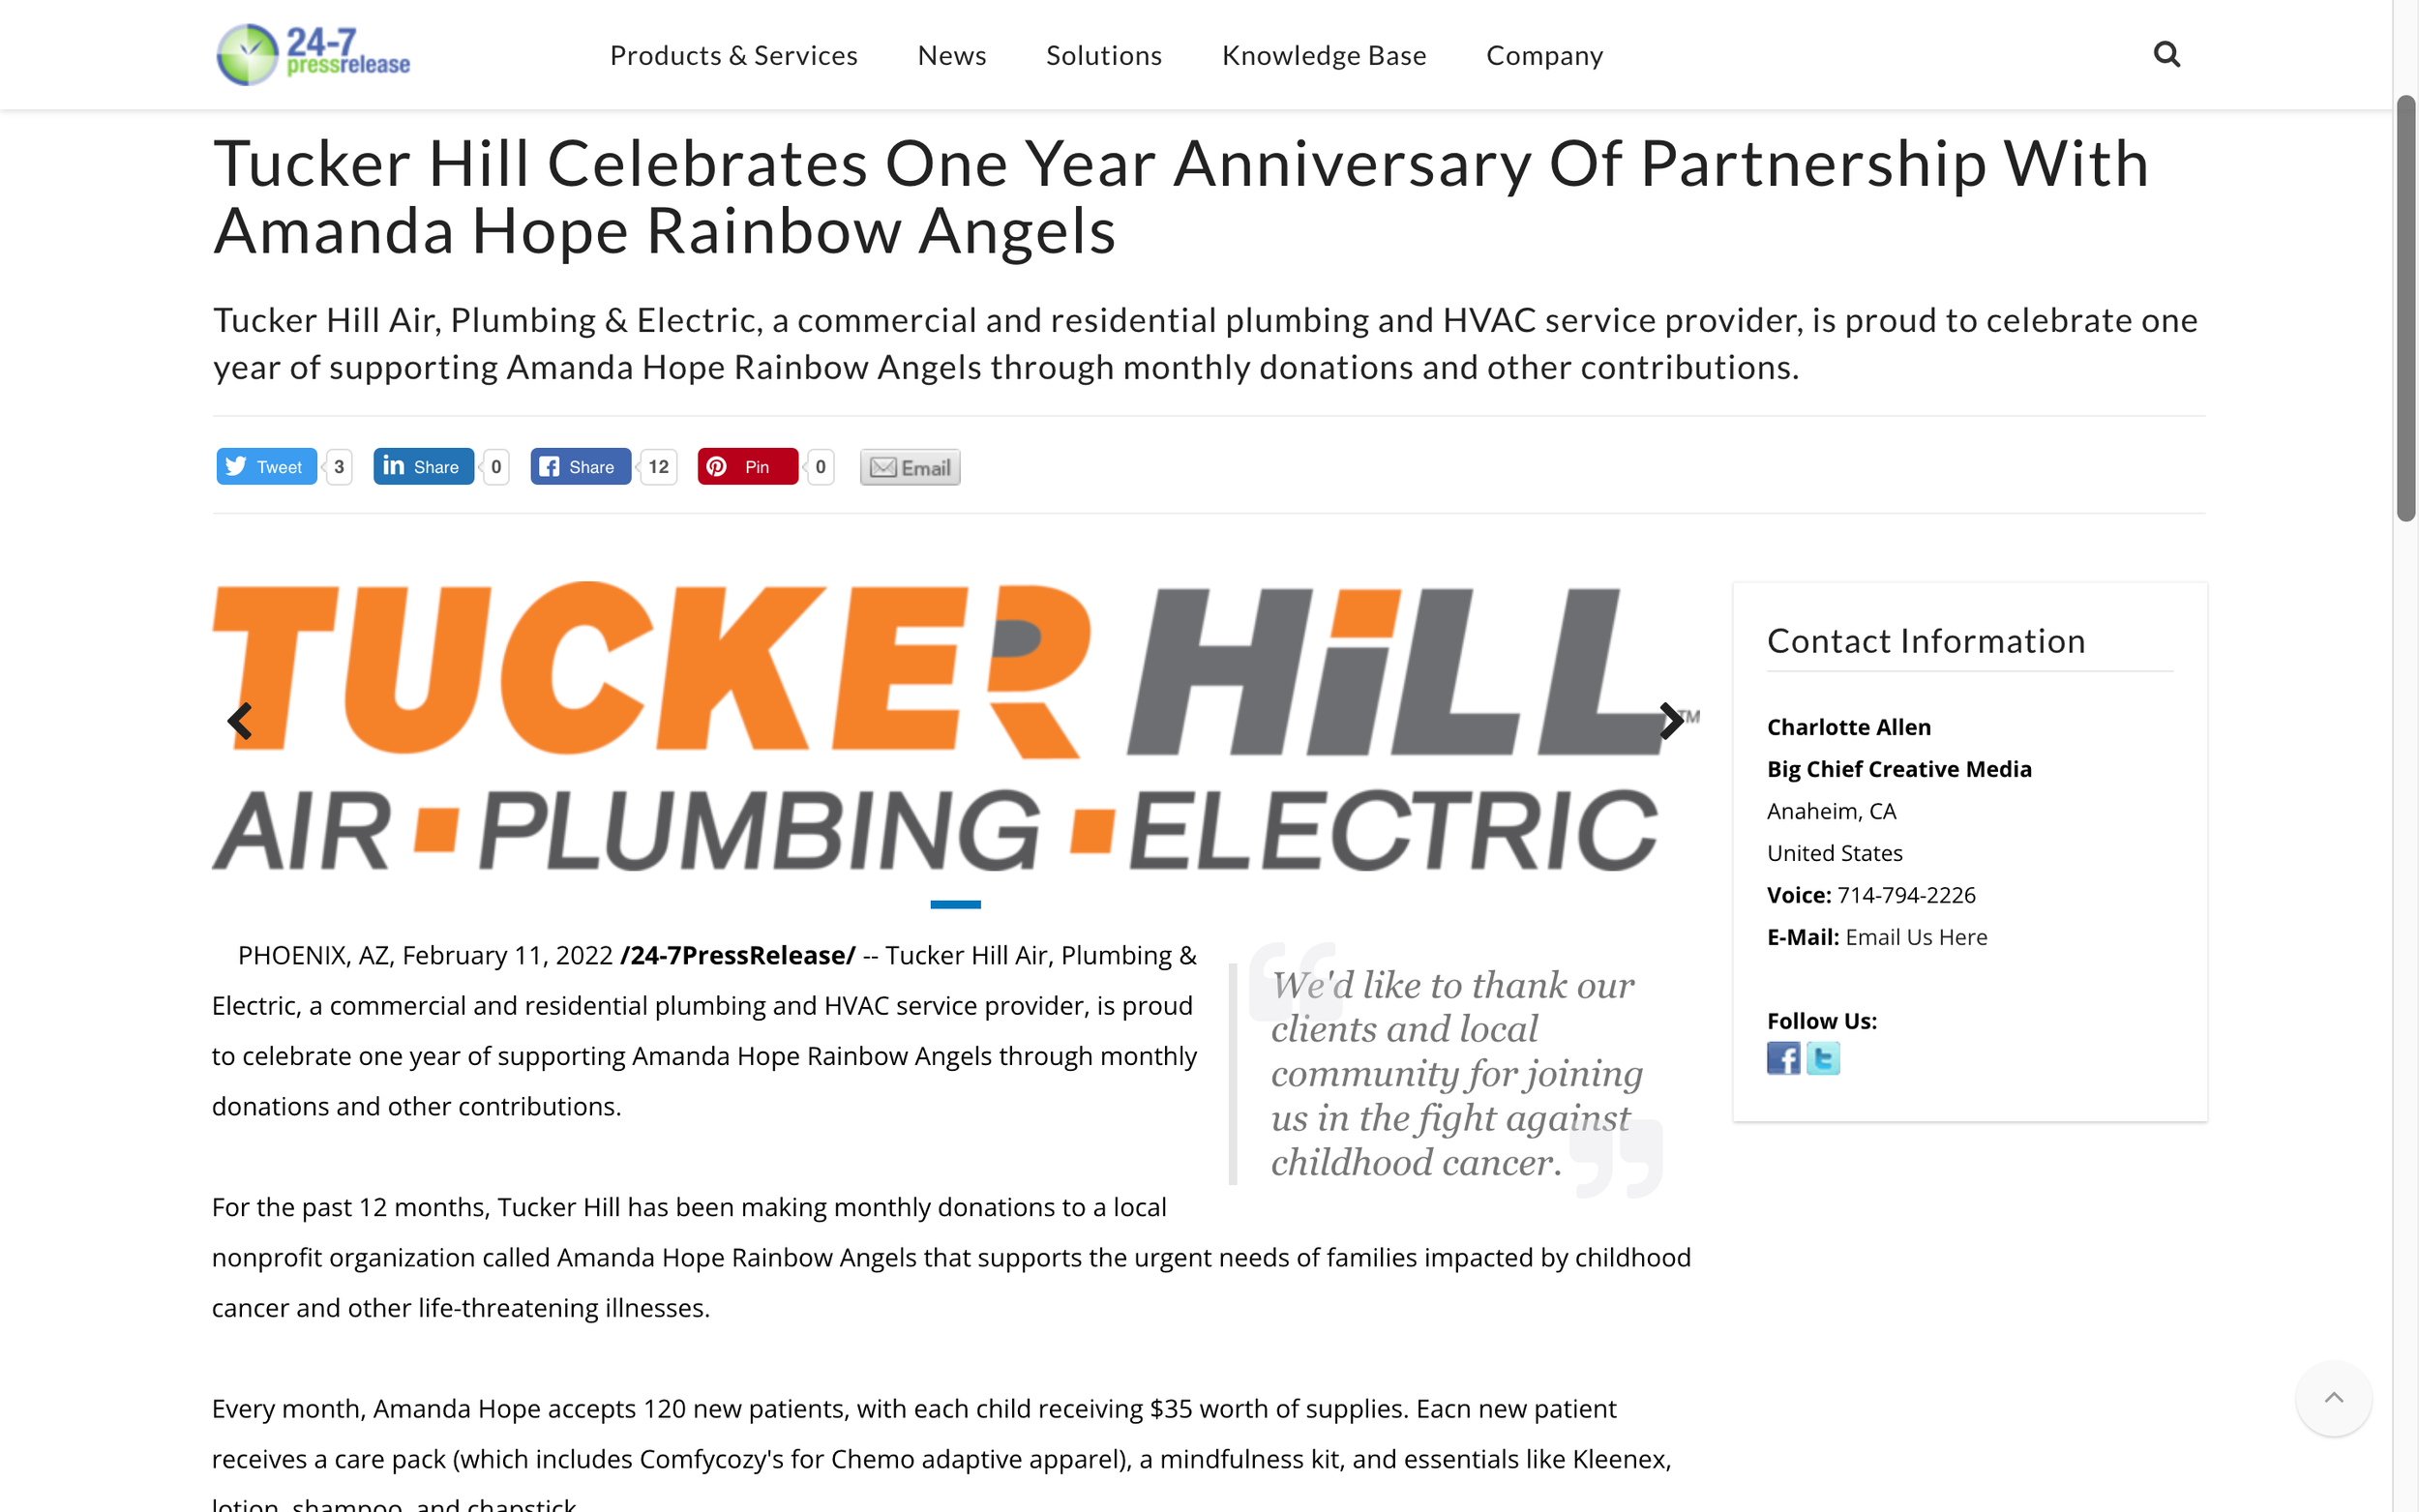 24 Hour Press Release: Tucker Hill Celebrates One Year Anniversary Of Partnership With Amanda Hope Rainbow Angels (Copy)